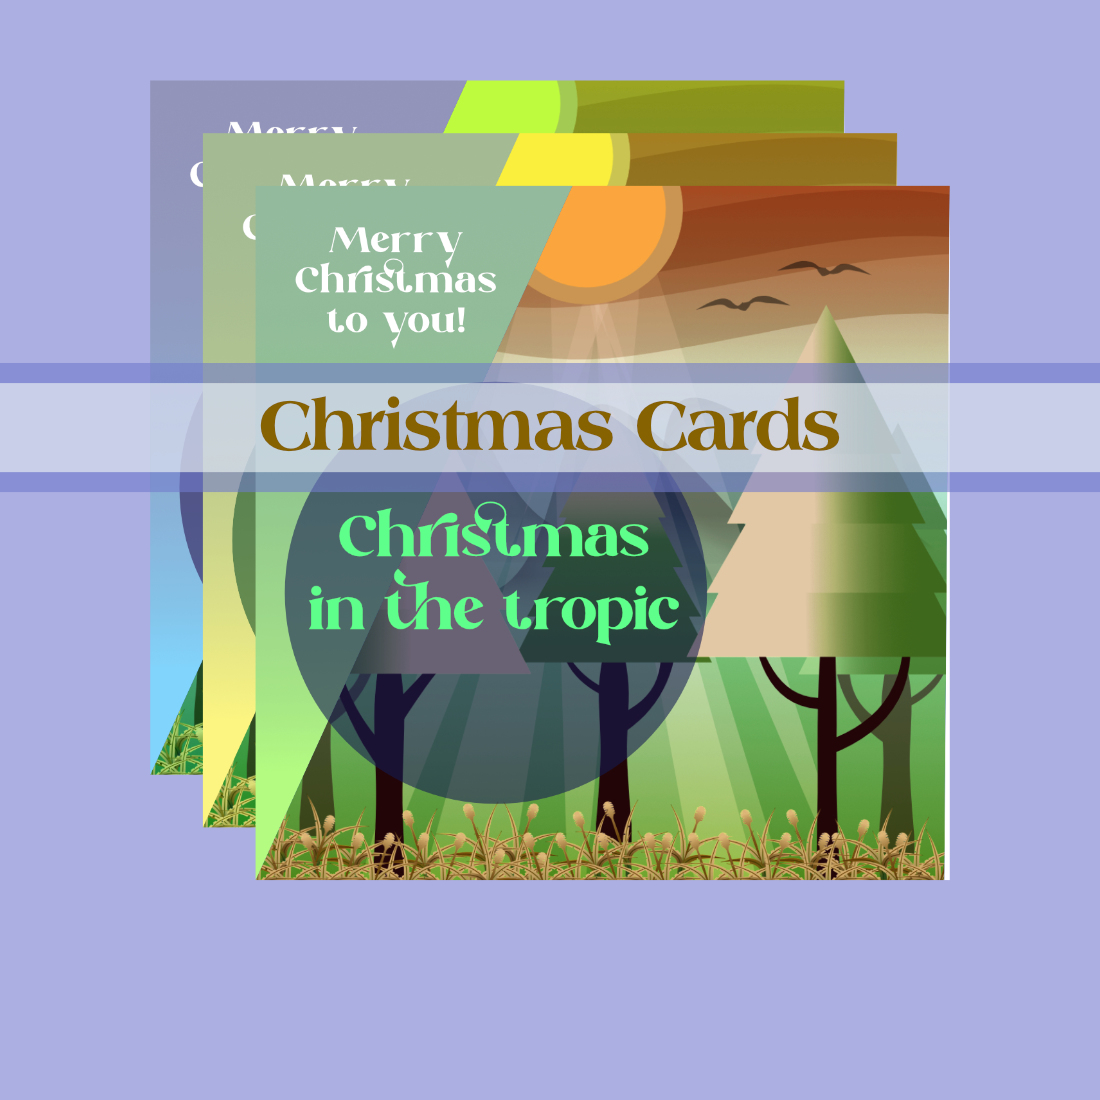 3 Christmas in the Tropic Cards preview image.